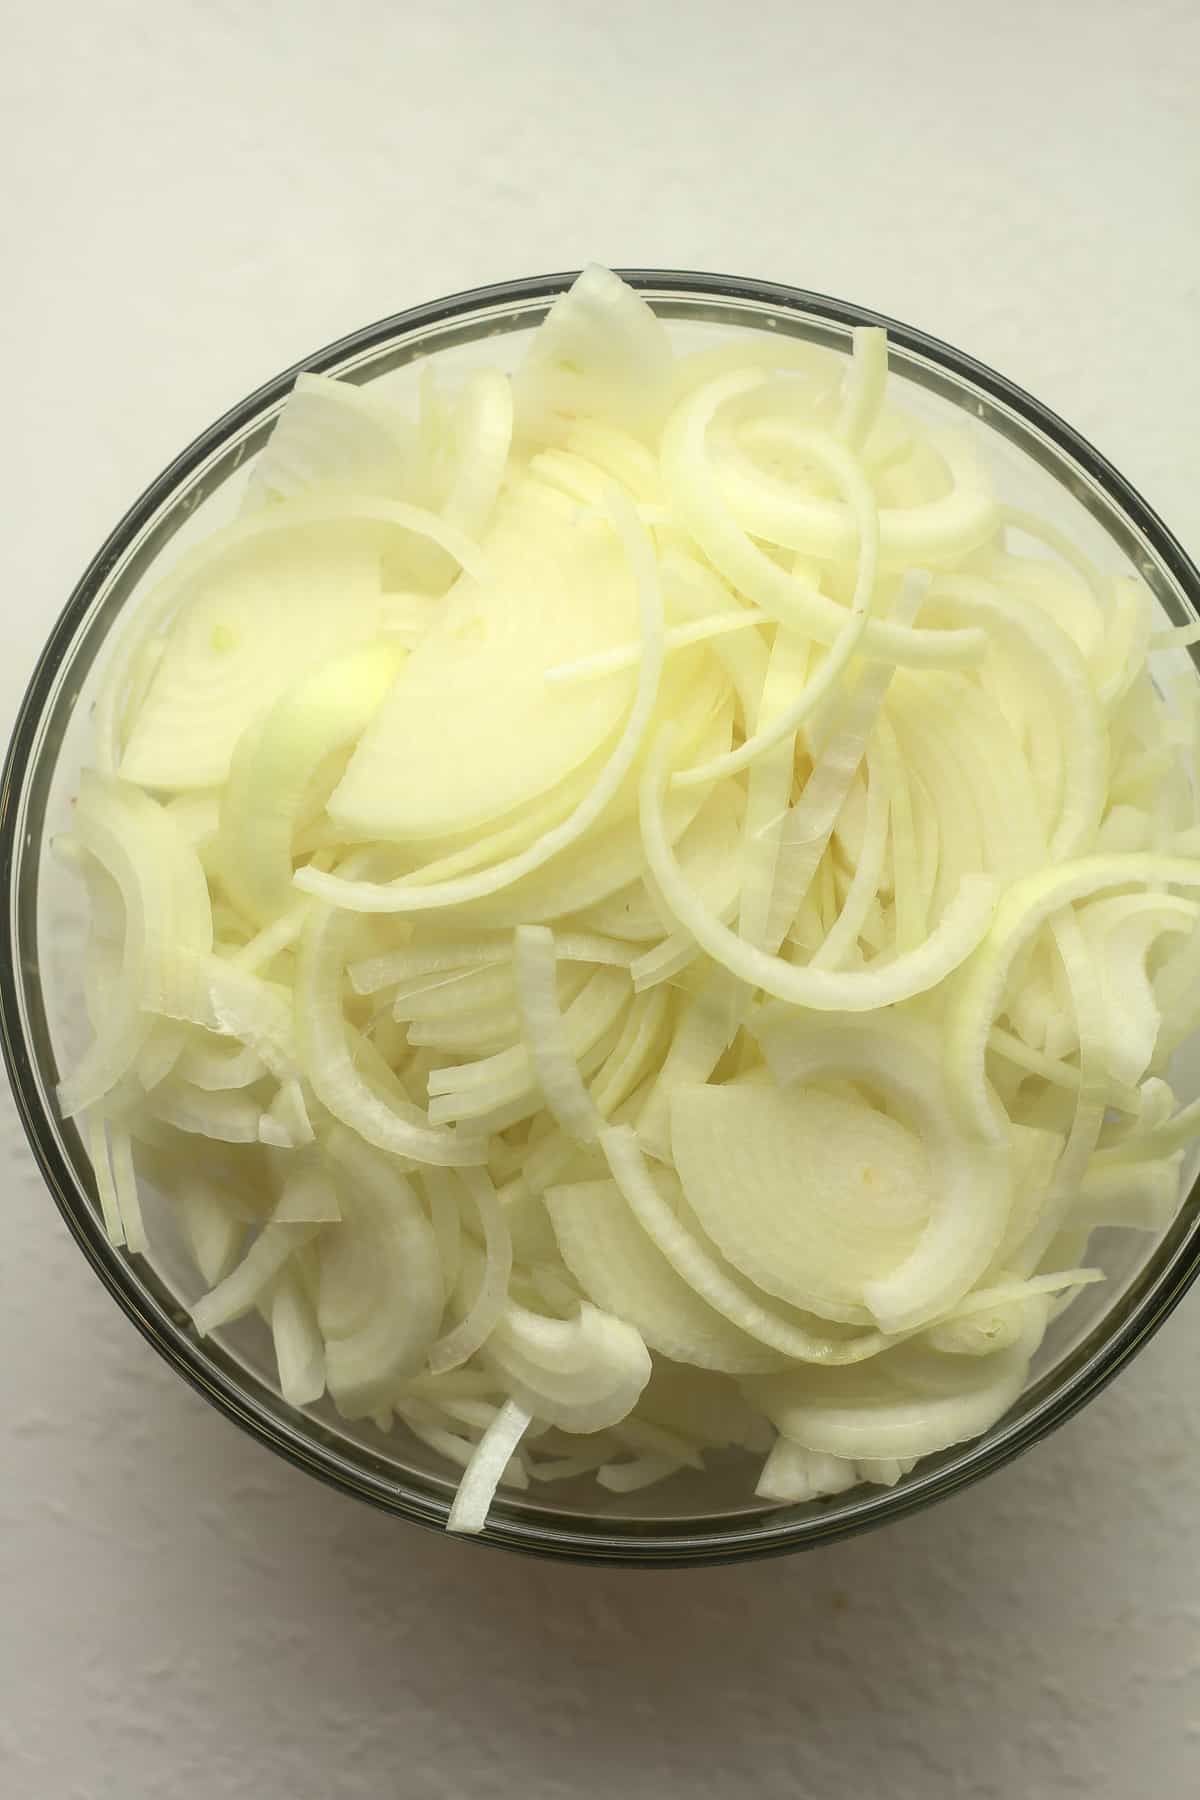 The bowl of sliced onions.